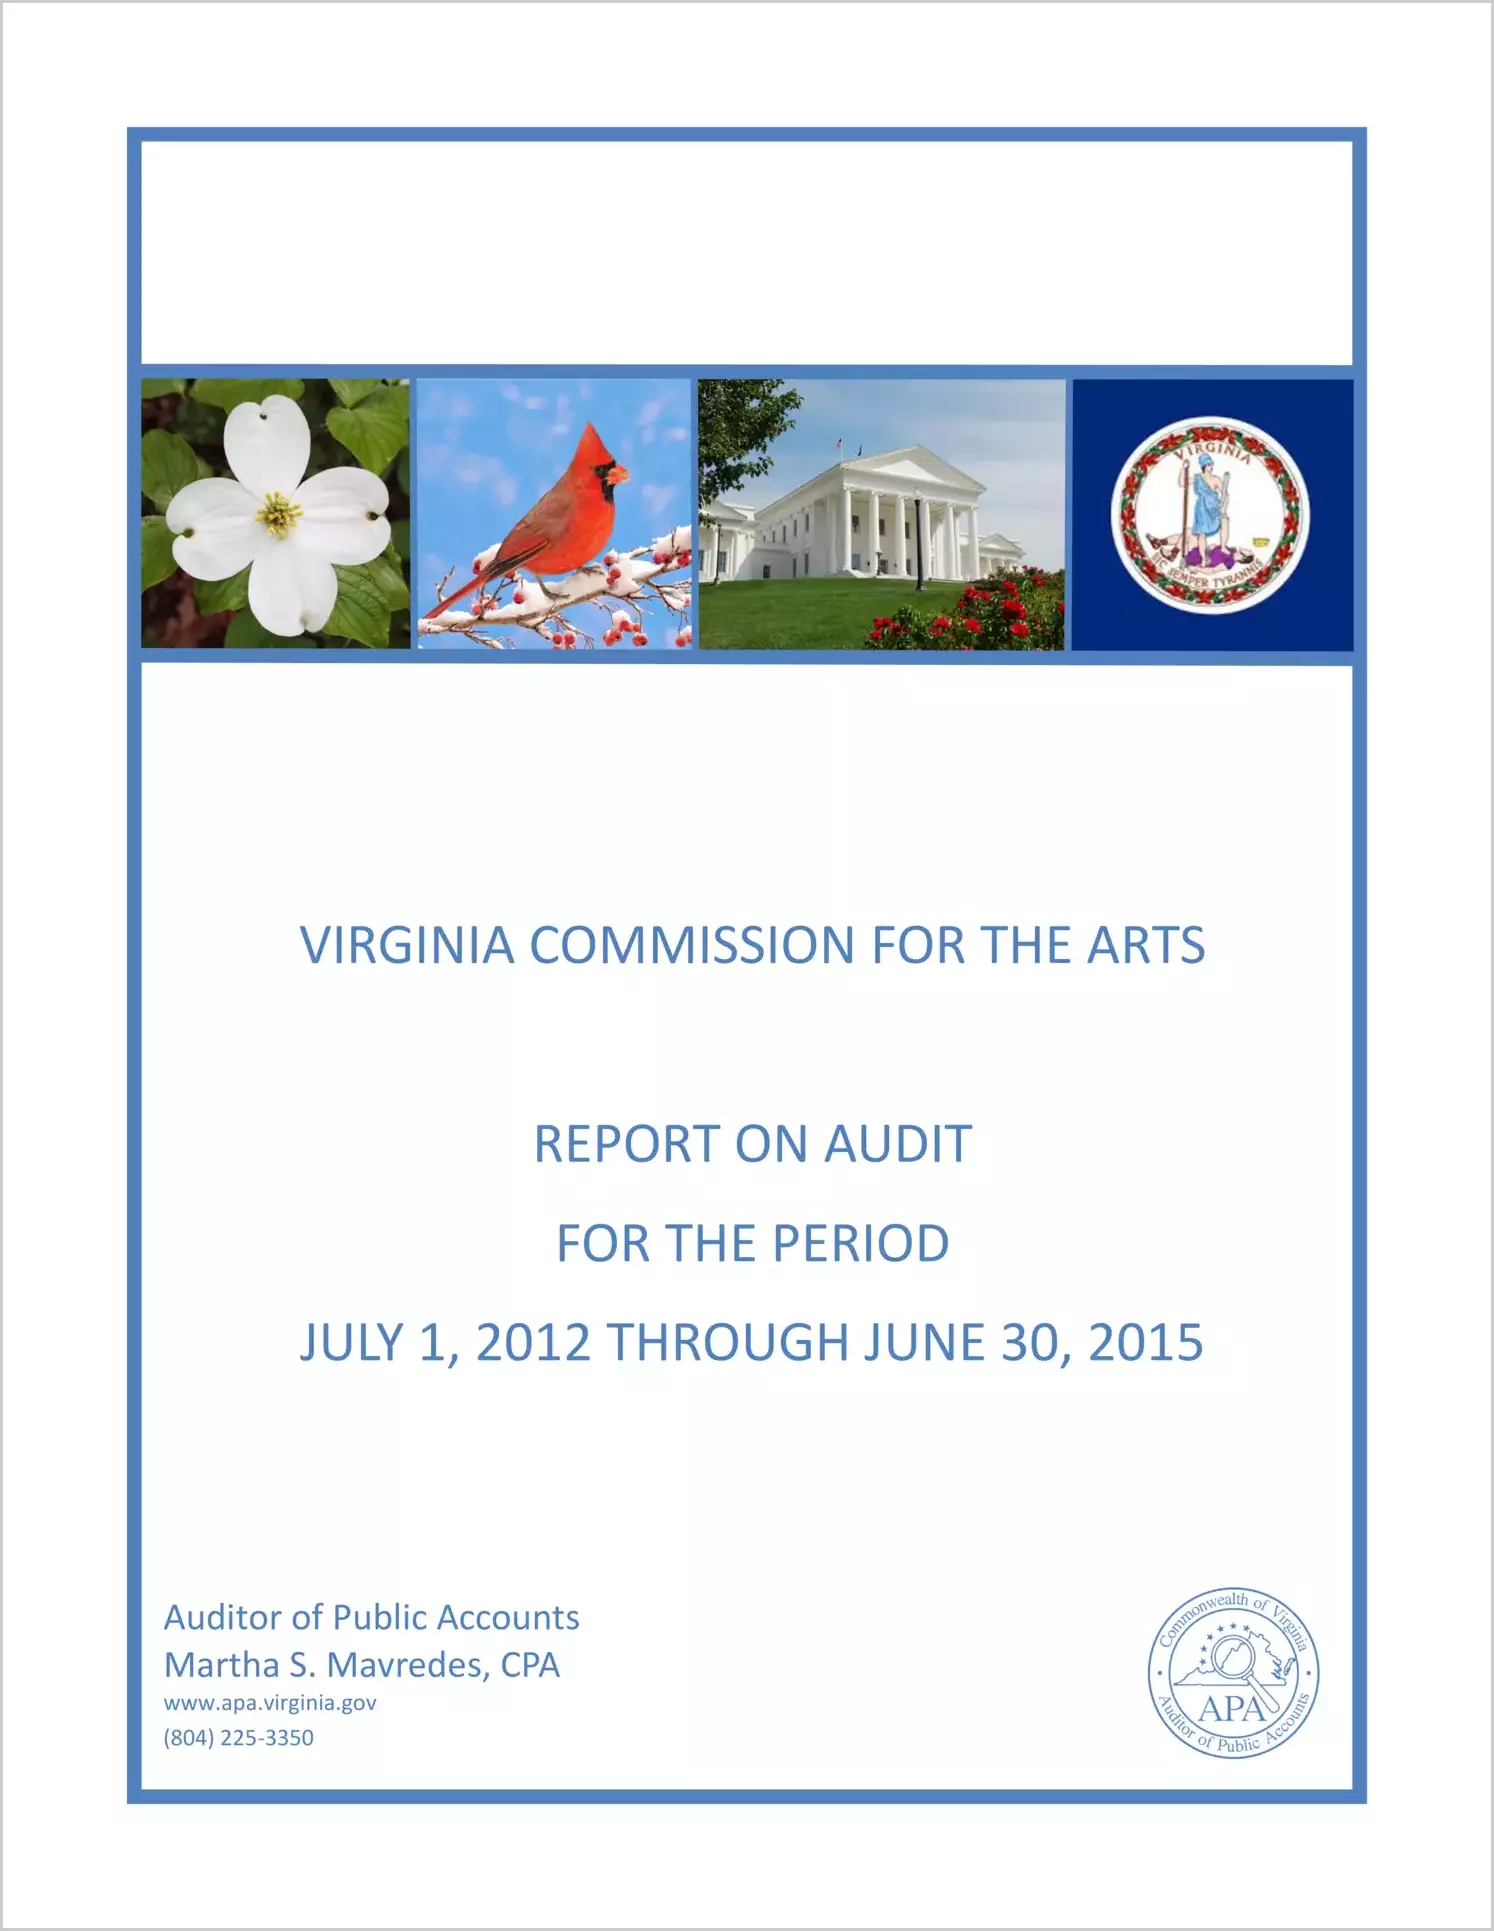 Virginia Commission for the Arts report on audit for the period July 1, 2012 through June 30, 2015